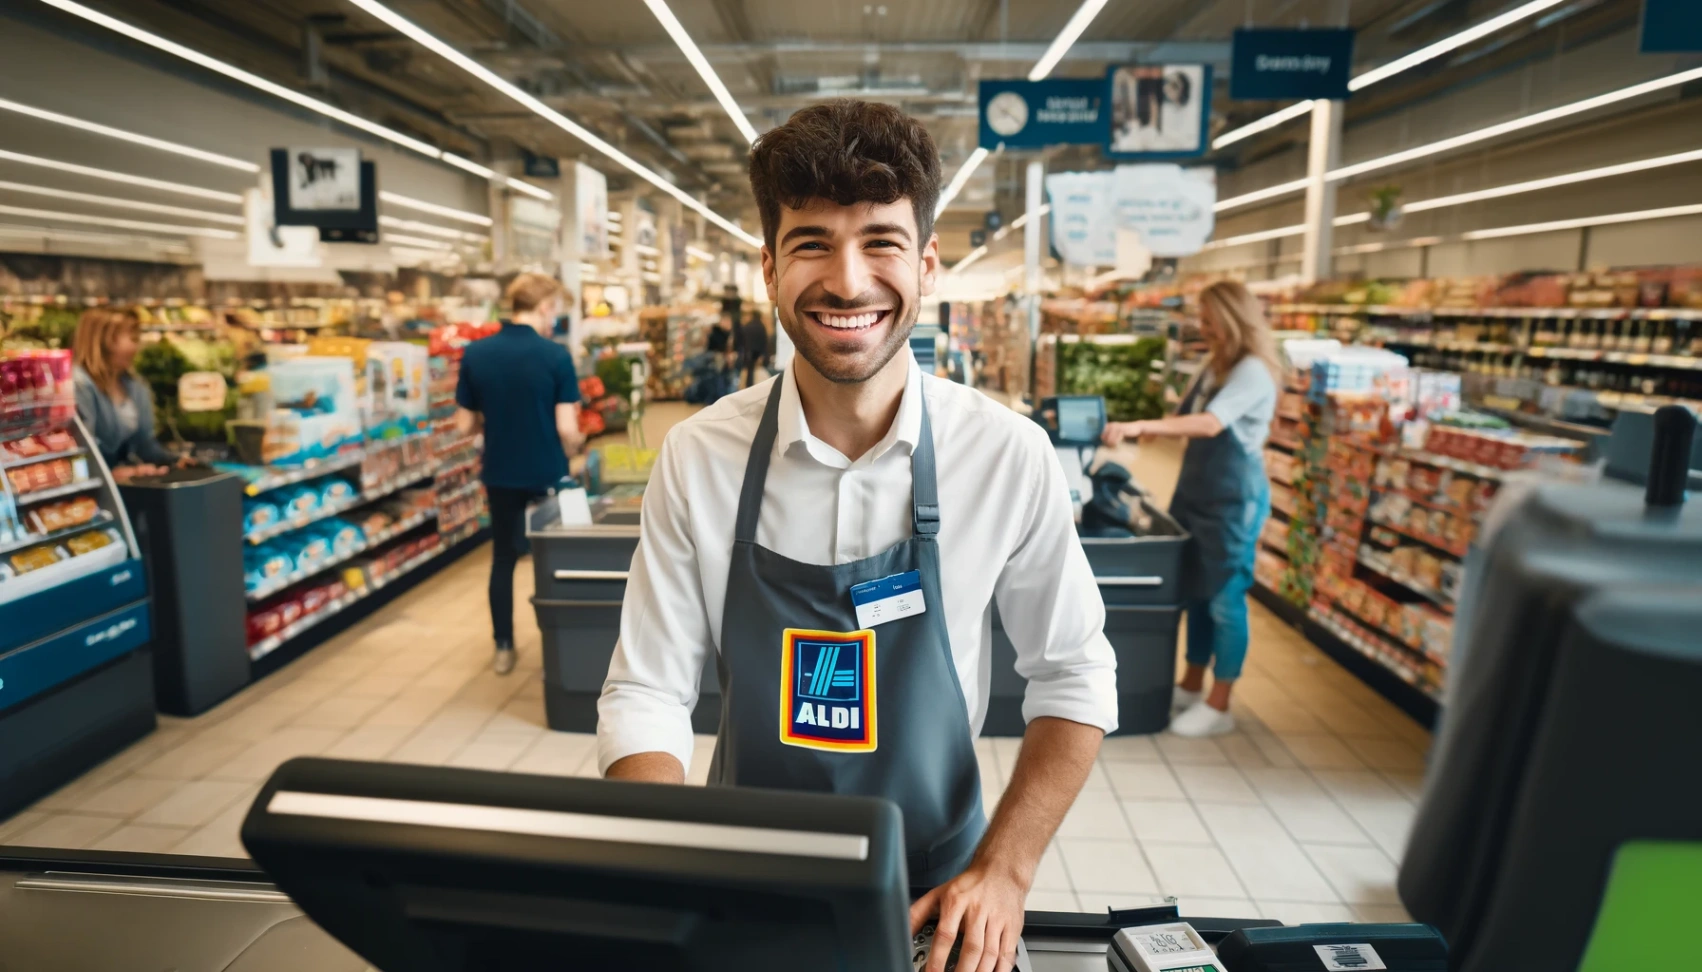 Aldi Job Opportunities and Hiring Process: Learn How to Apply